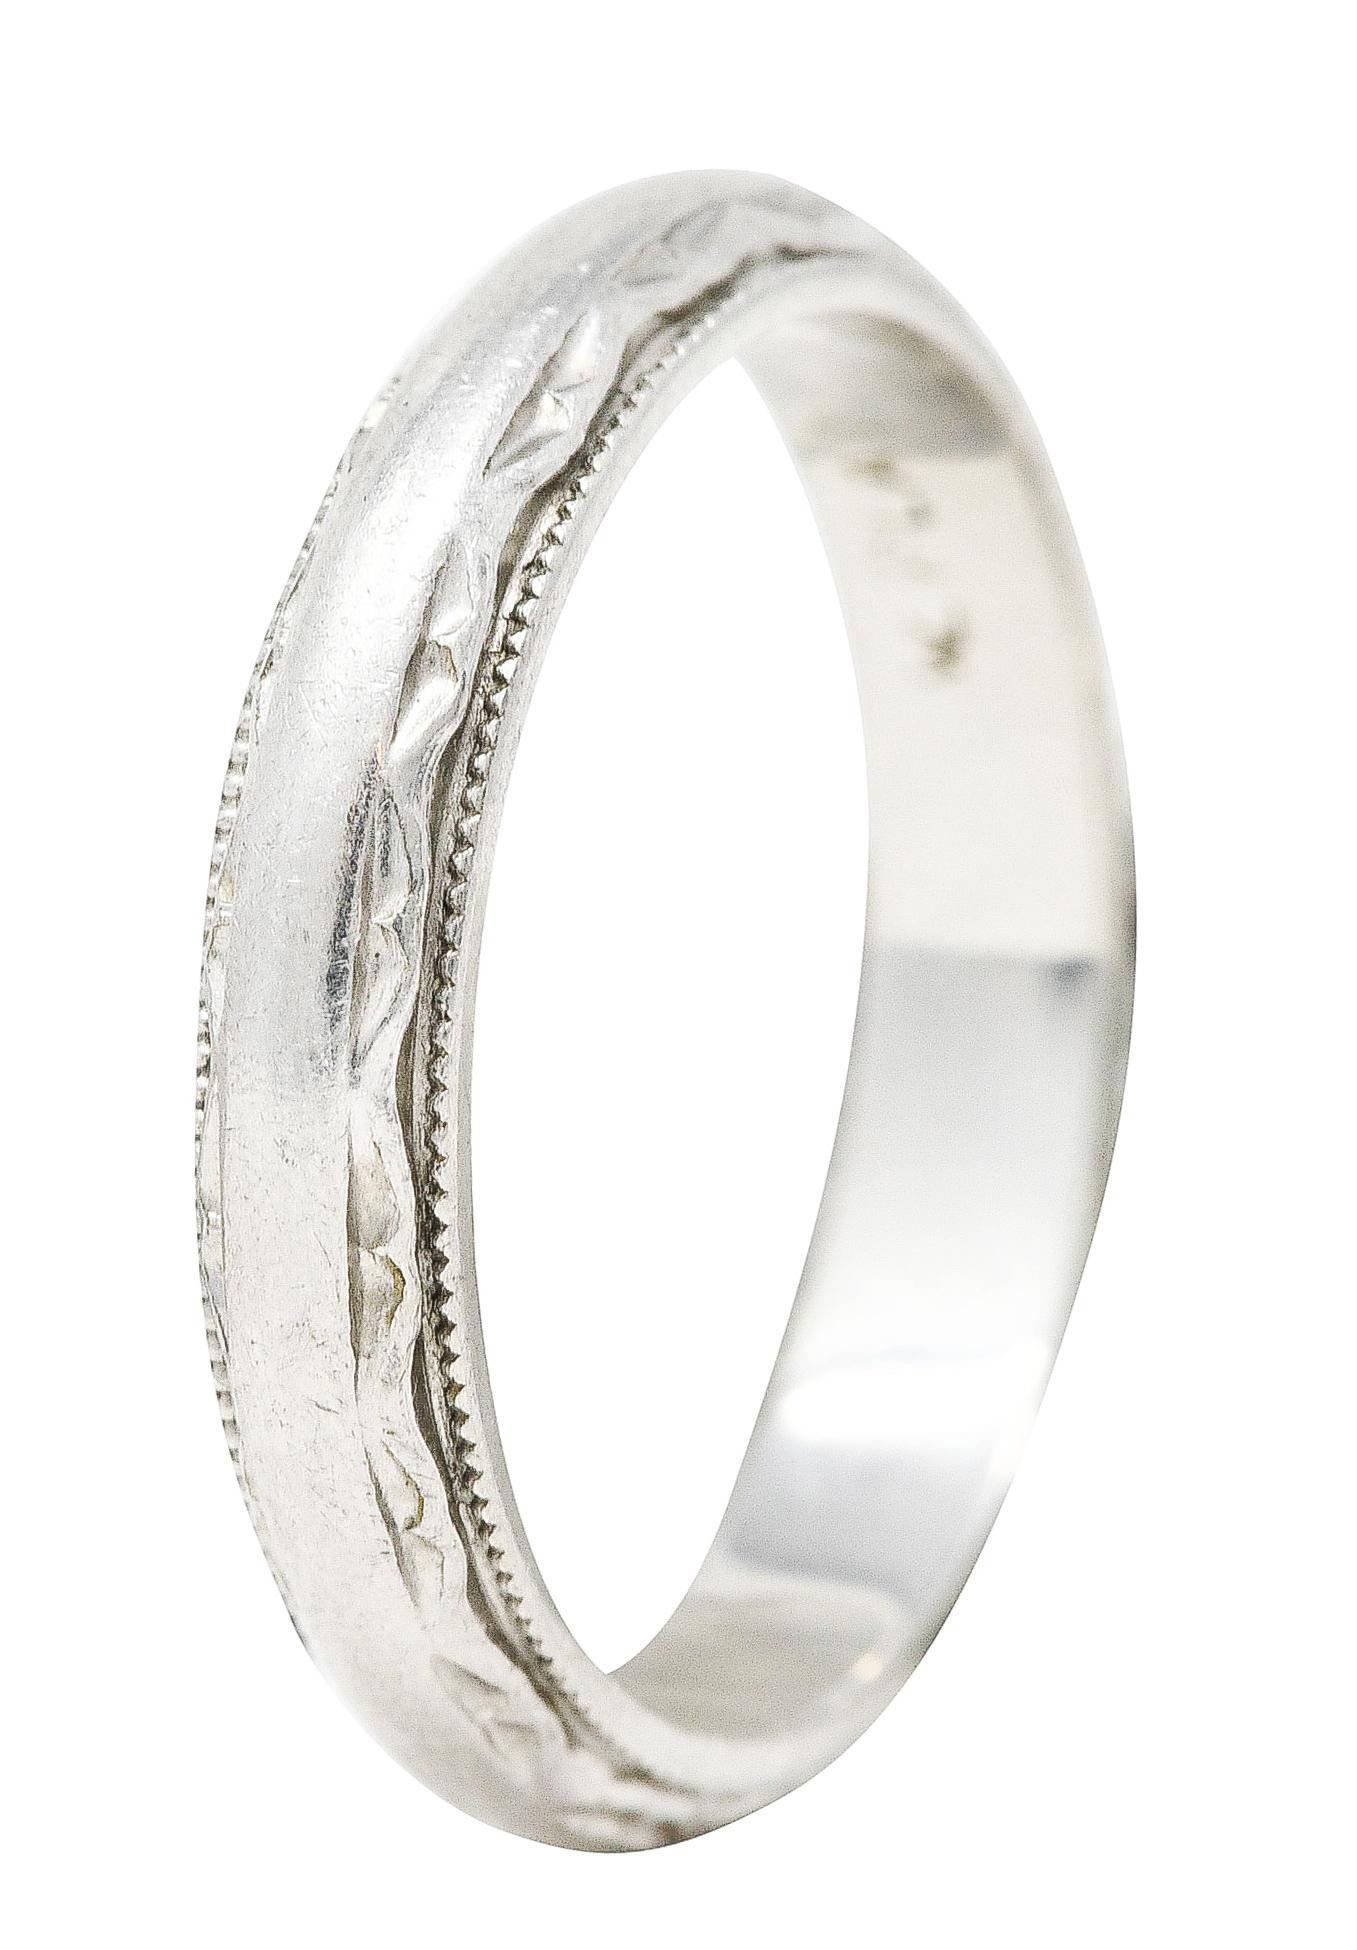 Band ring features a grooved scallop design fully around. With milgrain surround. Stamped plat for platinum. Inscribed 'Love Joe 9-5-99'. Circa: Late 20th century. Ring size: 6 1/4 and not sizable. Measures: North to South 3.5 mm and sits 1.5 mm